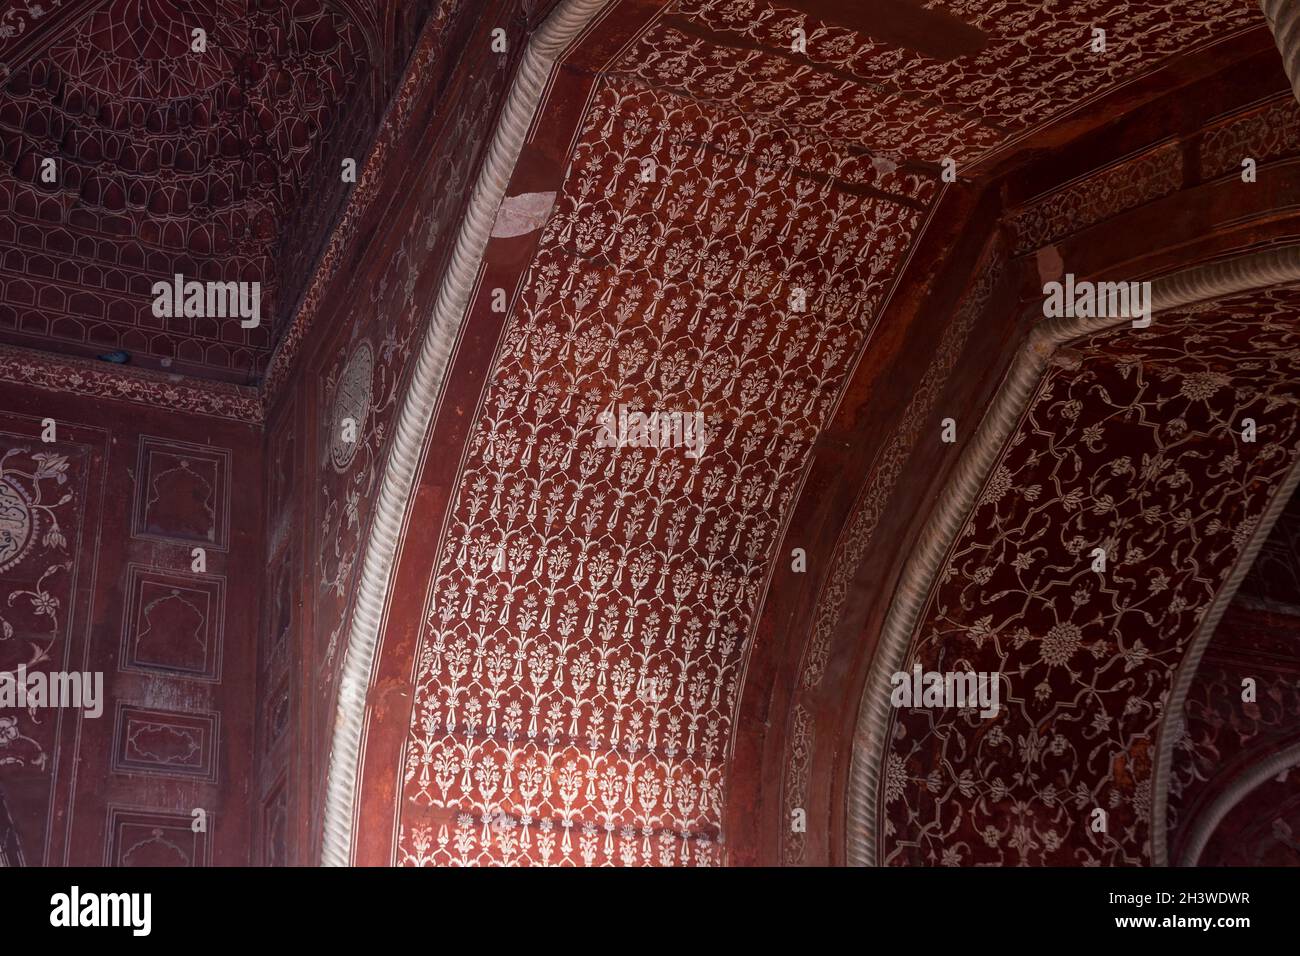 Paintings in the mosque located West of the mausoleum in the Taj Mahal complex Stock Photo